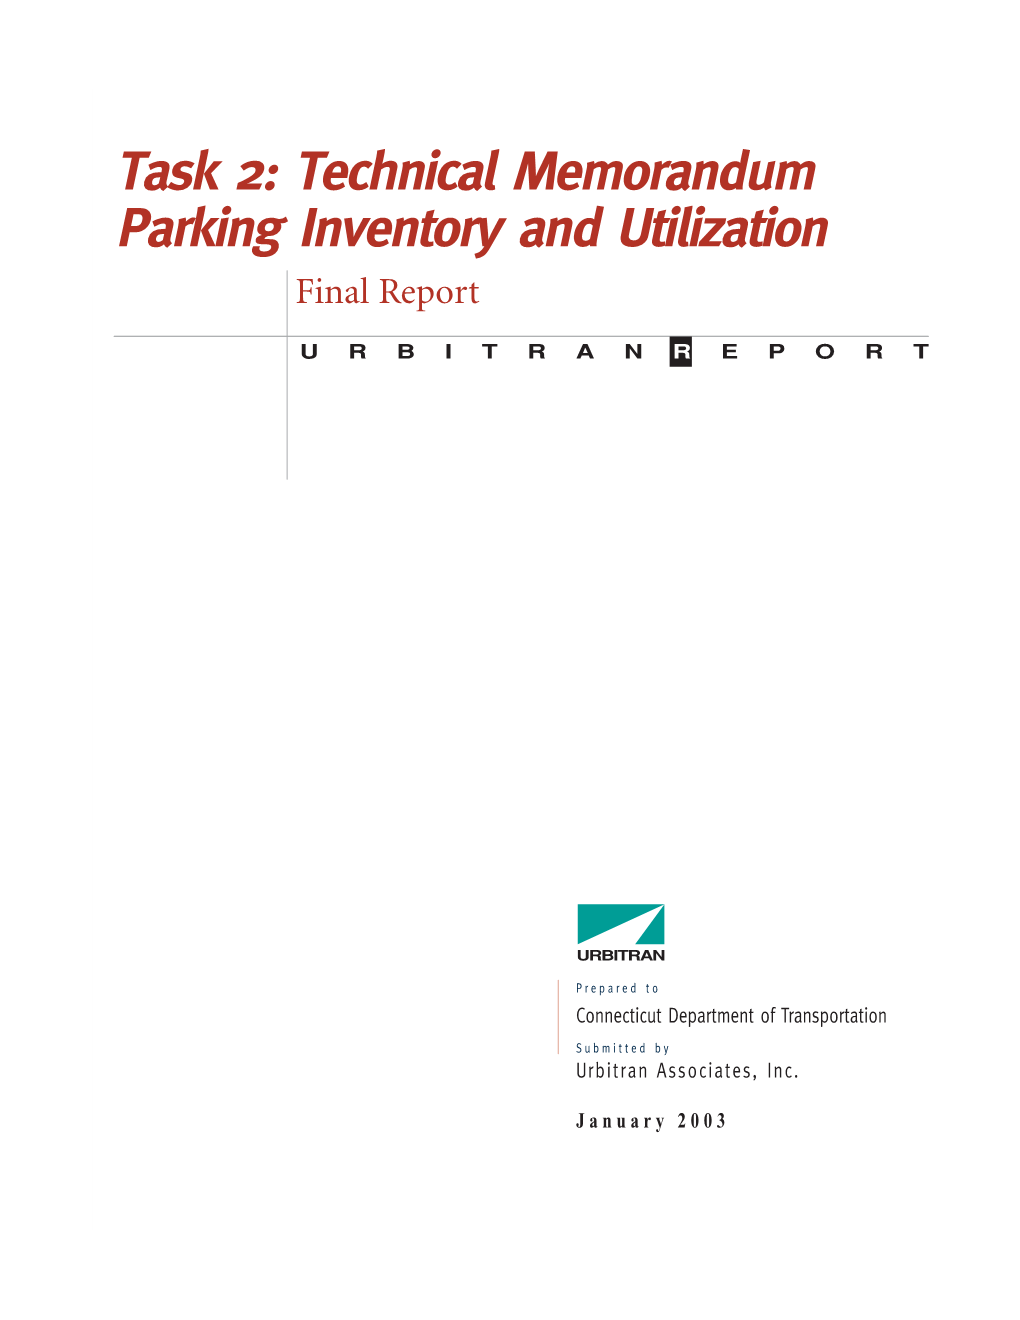 Parking Inventory and Utilization Final Report